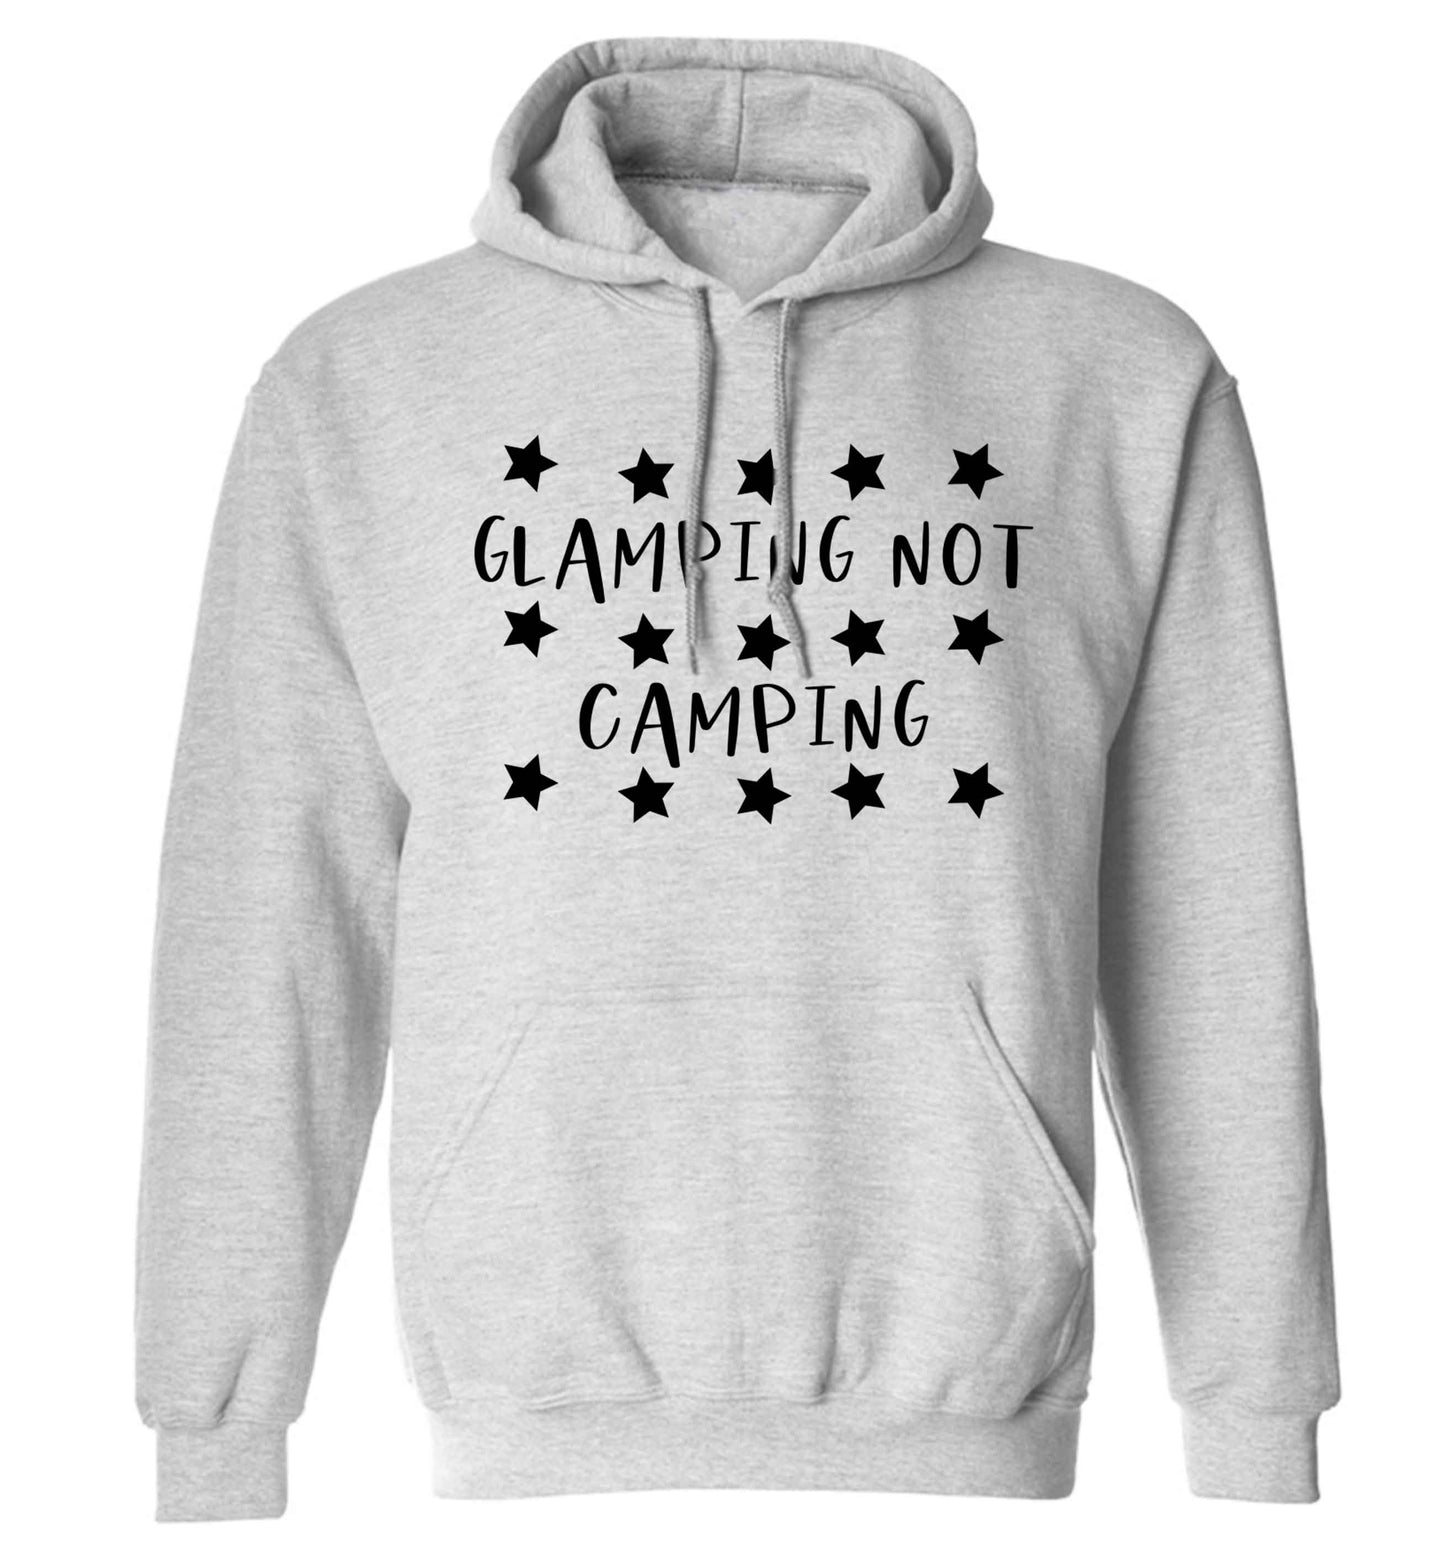 Glamping not camping adults unisex grey hoodie 2XL